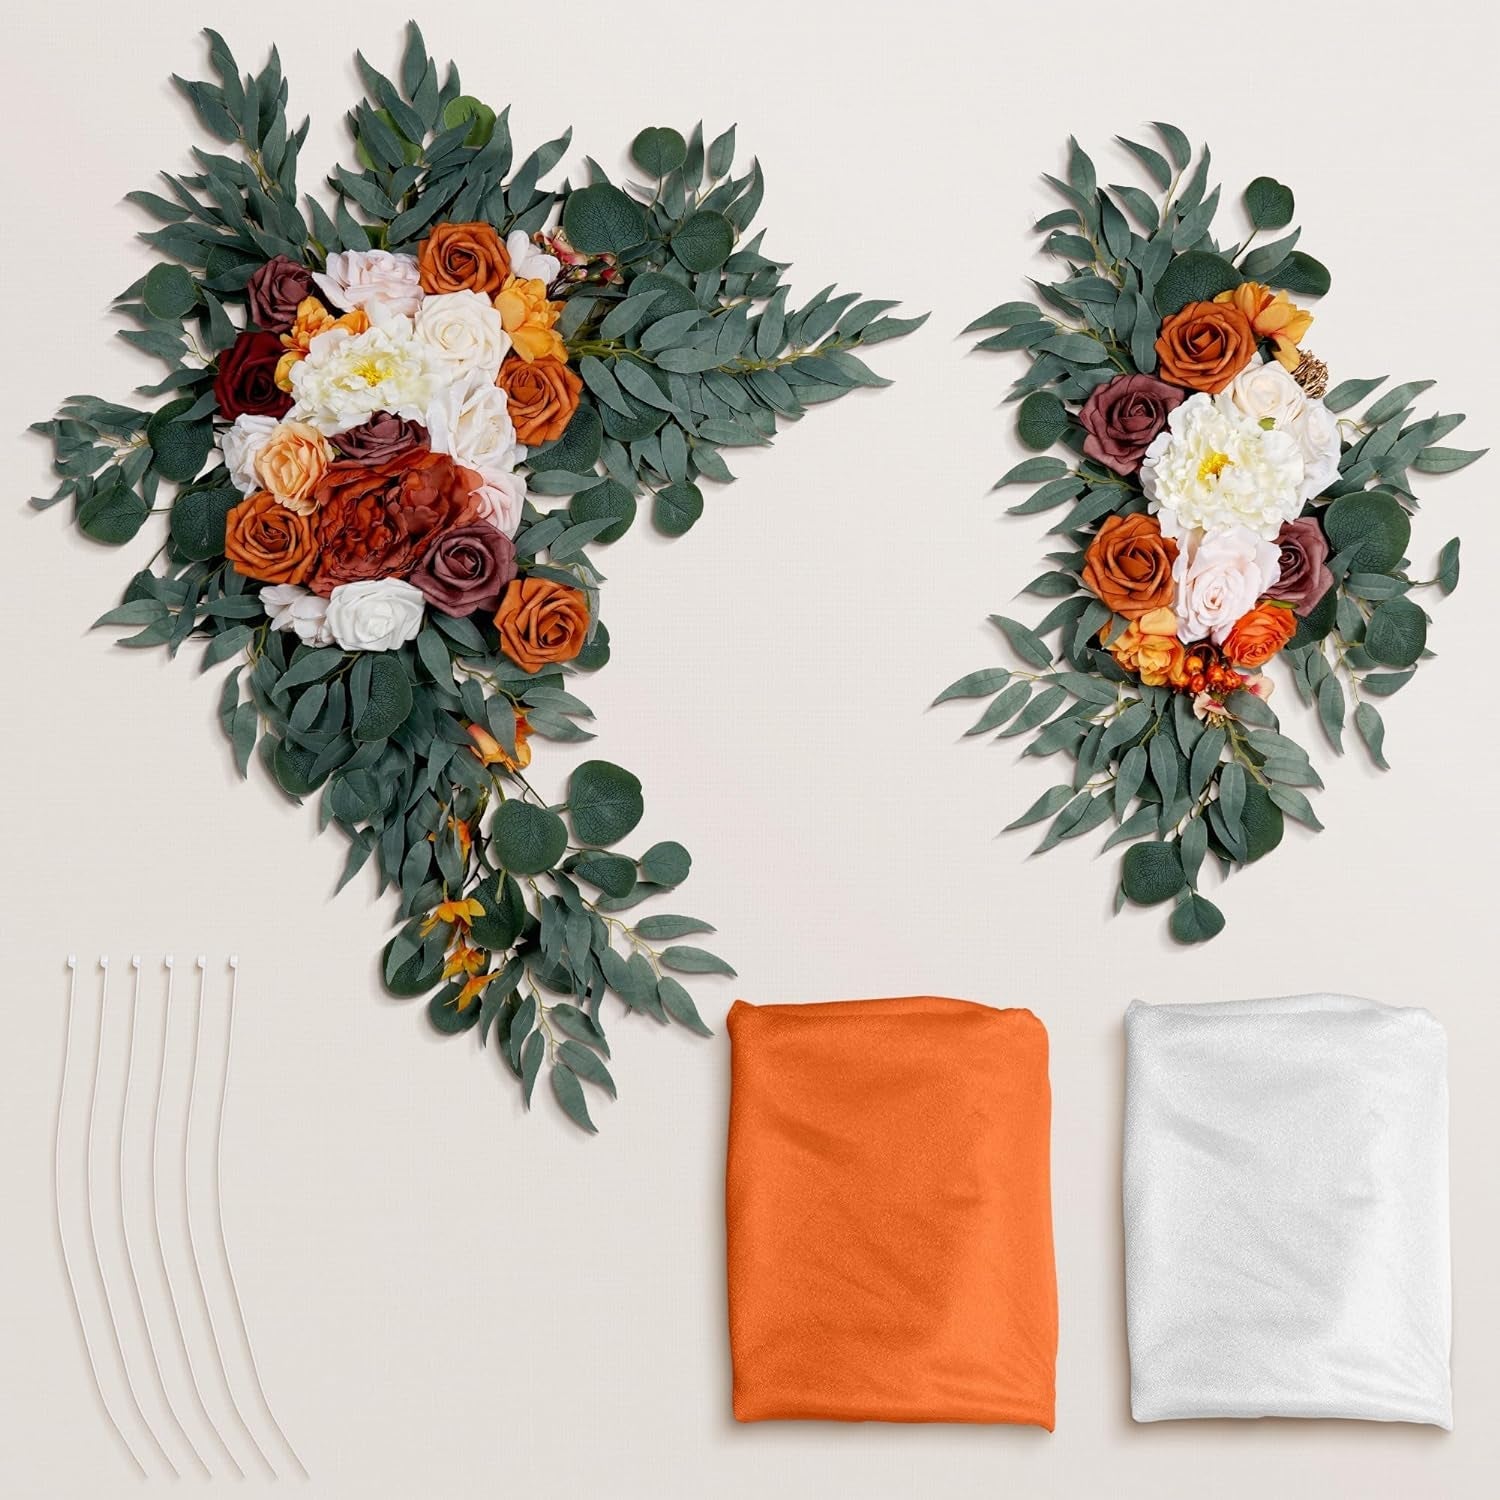 Arch Flowers with Drapes Kit (Pack of 4) - 2 Pcs Artificial Ivory & White Floral Swag Arrangement - 2Pcs 24″ Draping Fabric for Wedding Ceremony Arbor and Reception Backdrop Decoration - Orange